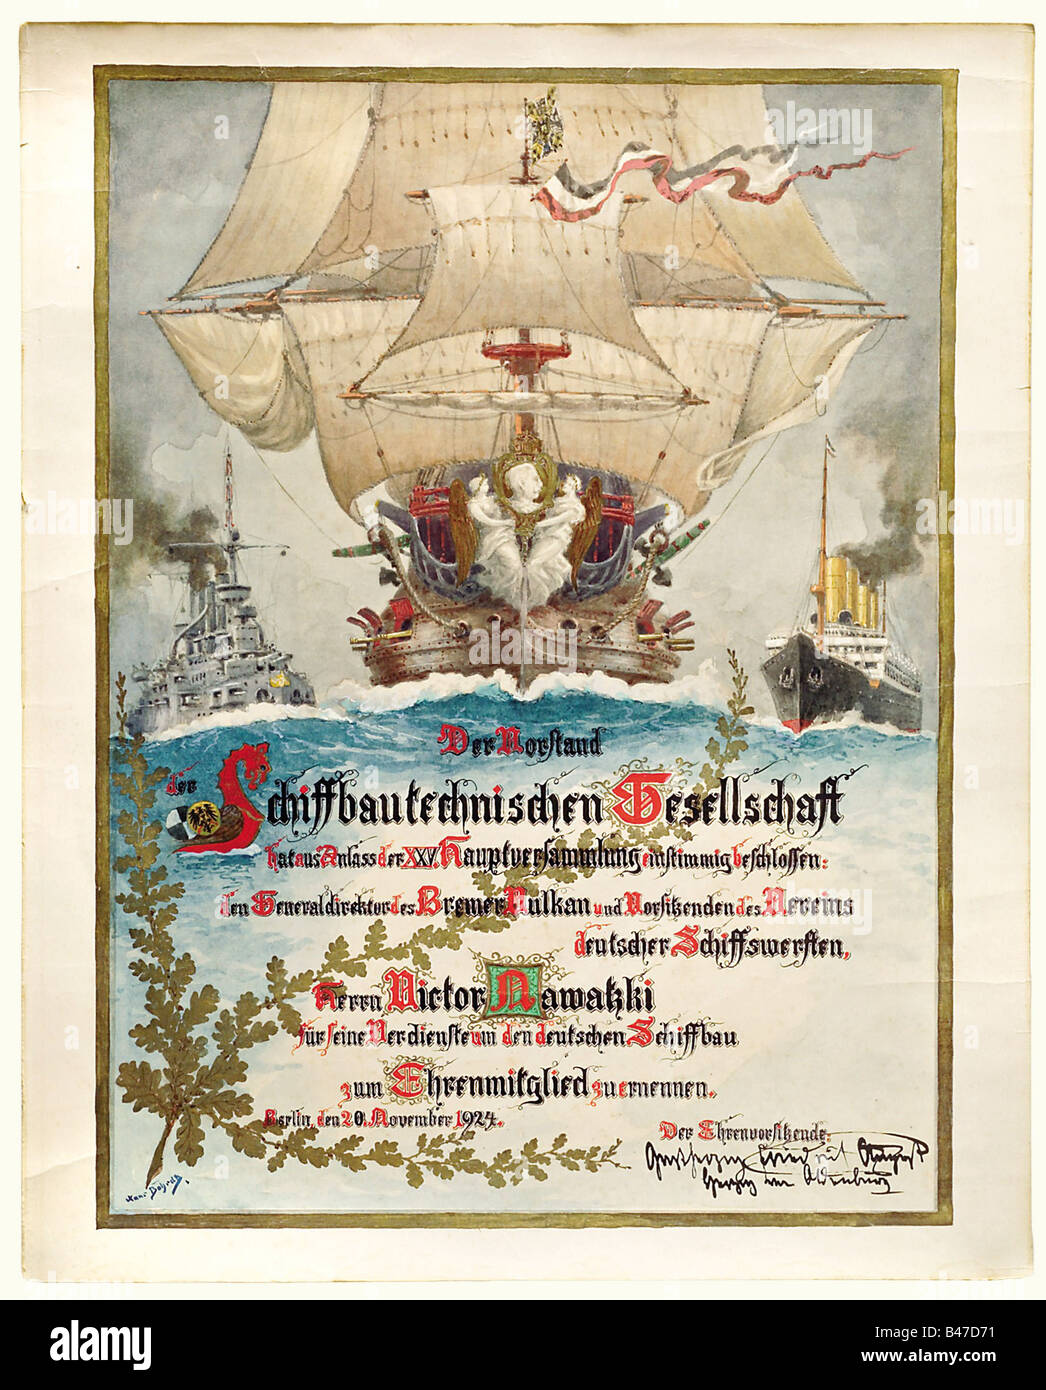 Hans Bohrdt (1857 - 1945), a hand-painted certificate for the General Director of Vulkan Bremen in 1924. Gouache on paper. Signed 'Hans Bohrdt' at the lower left. A large man-of-war with an imperial pennant and portrait of Emperor Wilhelm on the stem, flanked by a modern war ship and a steamer. The calligraphic text below is framed in golden oak leaves: 'The Board of Governors of the Technical Ship Building Society, on the occasion of the XXV. General Assembly have decided to award honourary membership to the General Director of Vulkan Bremen and Chai, Artist's Copyright has not to be cleared Stock Photo